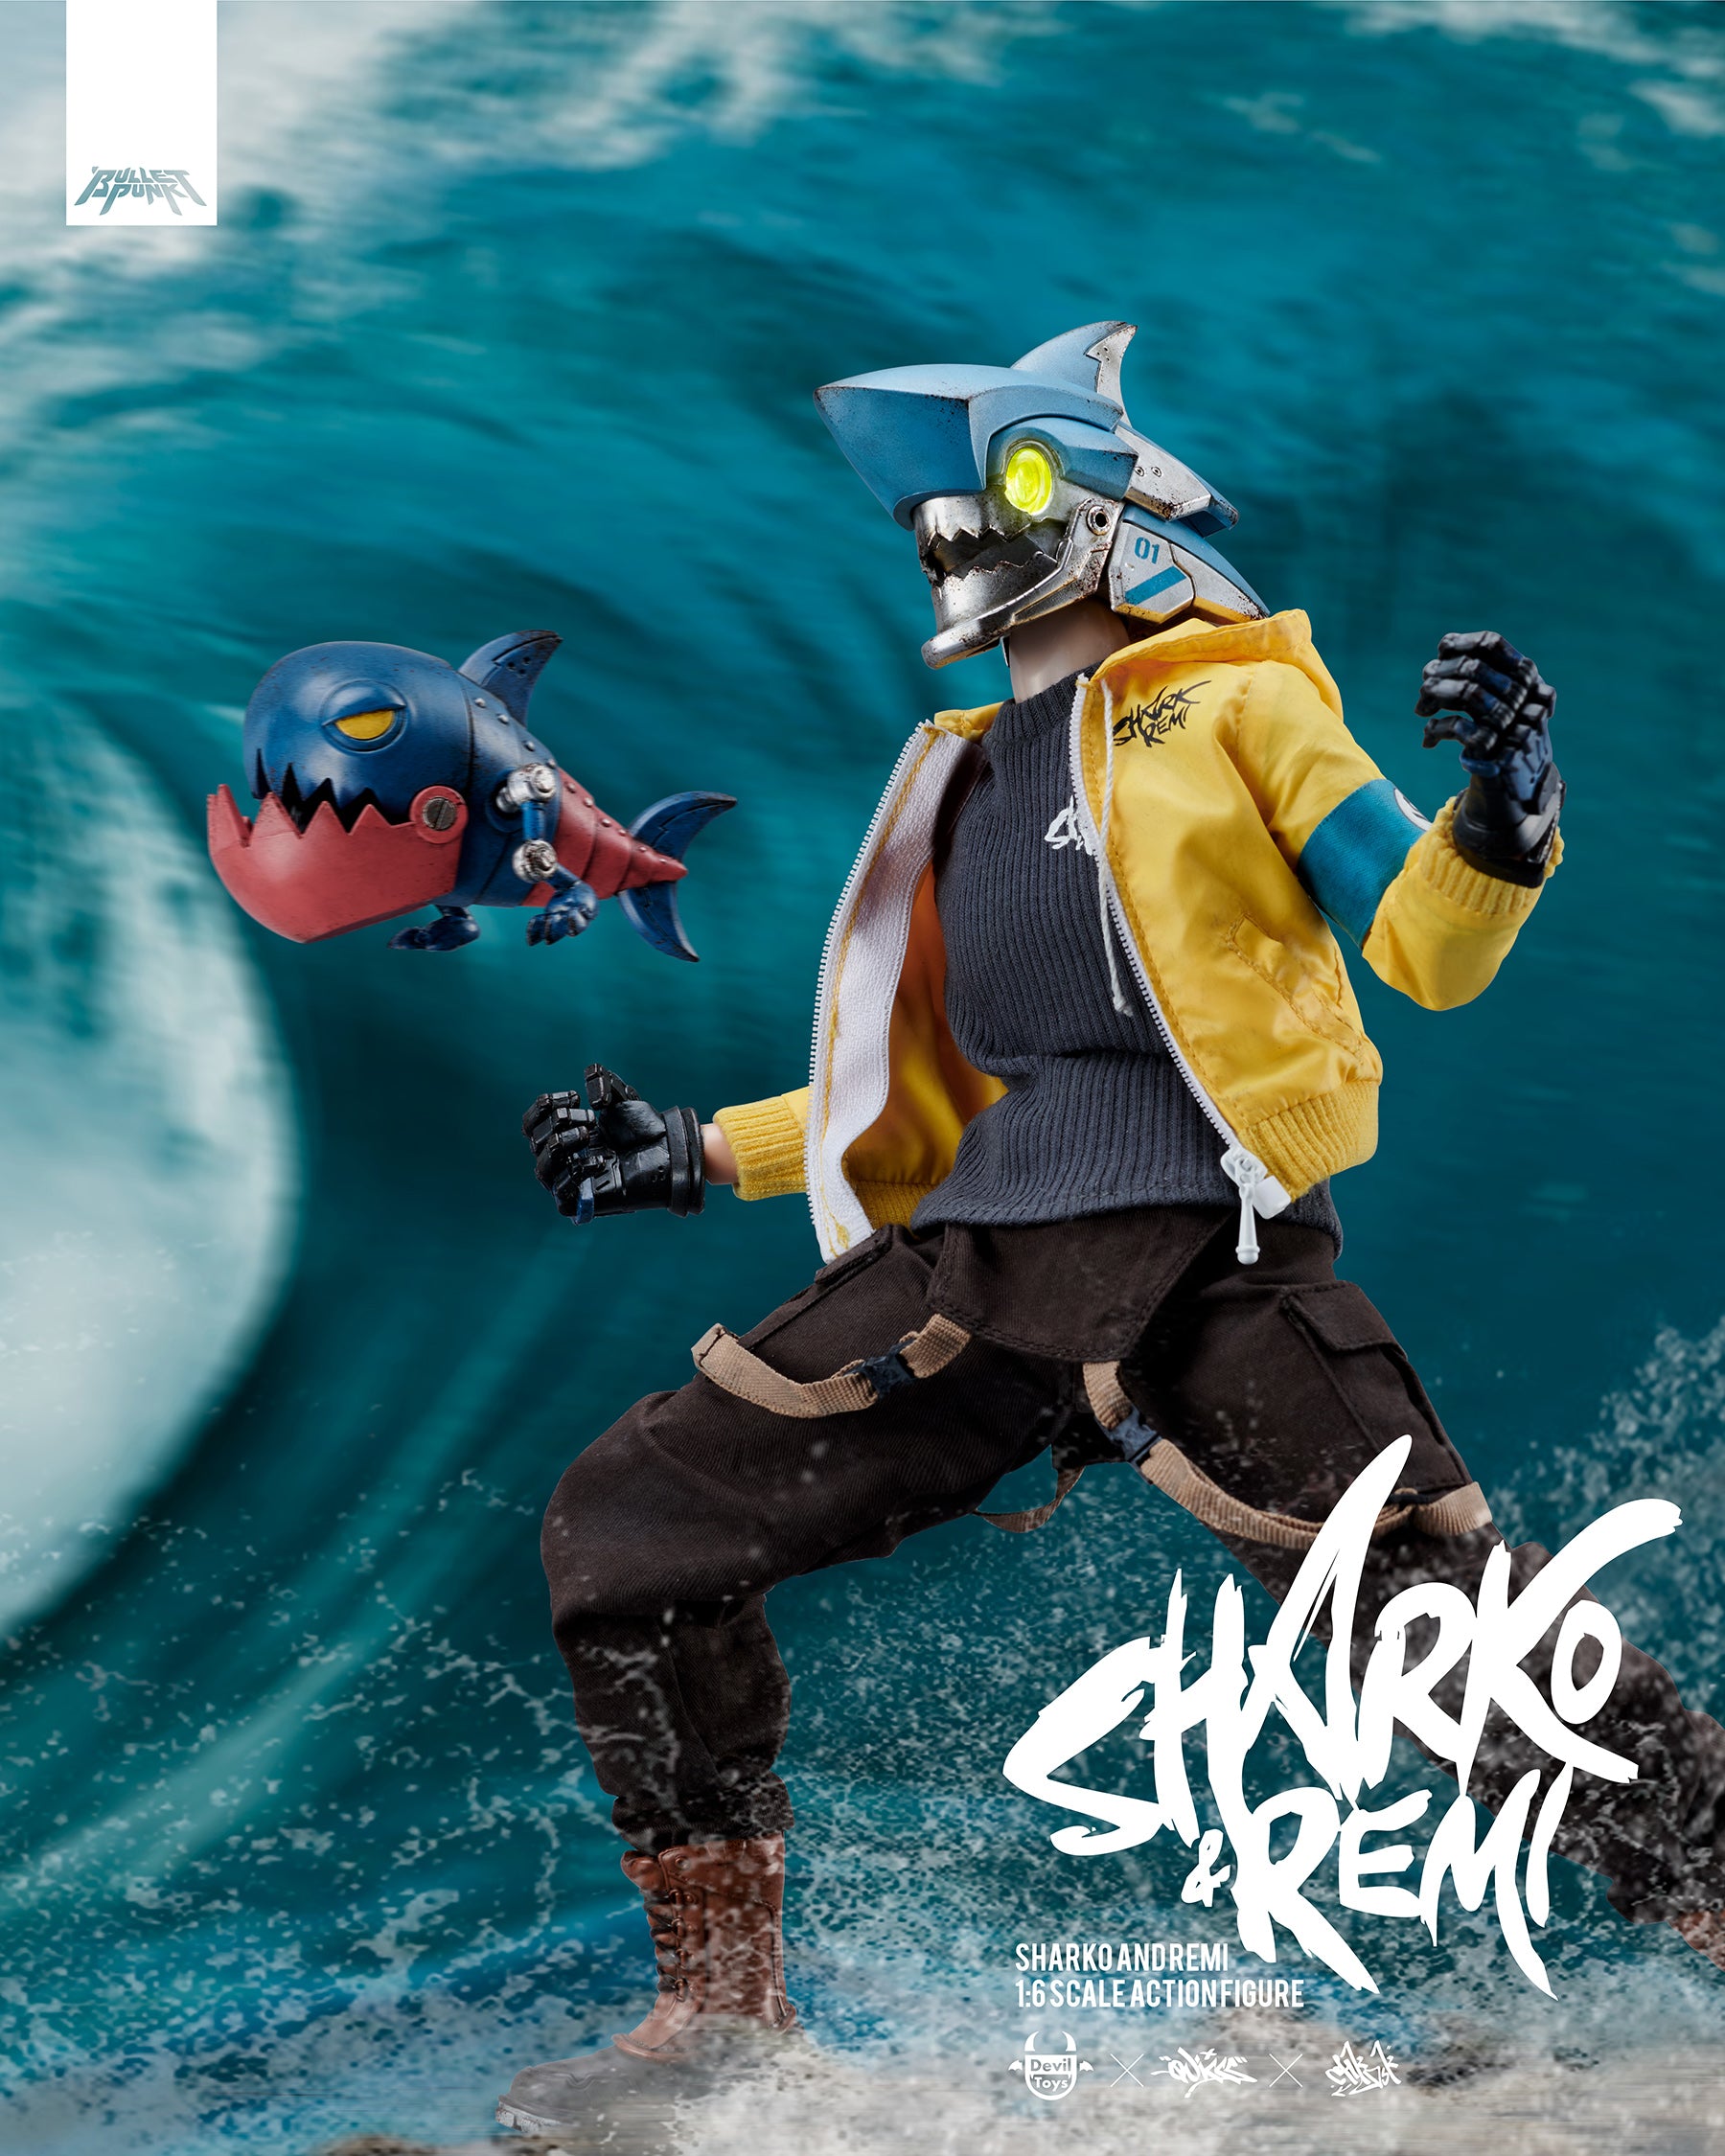 SHARKO & REMI 1/6 SCALE FIGURES(Yellow Submariner) By Quiccs x CHKDSK x Devil Toys